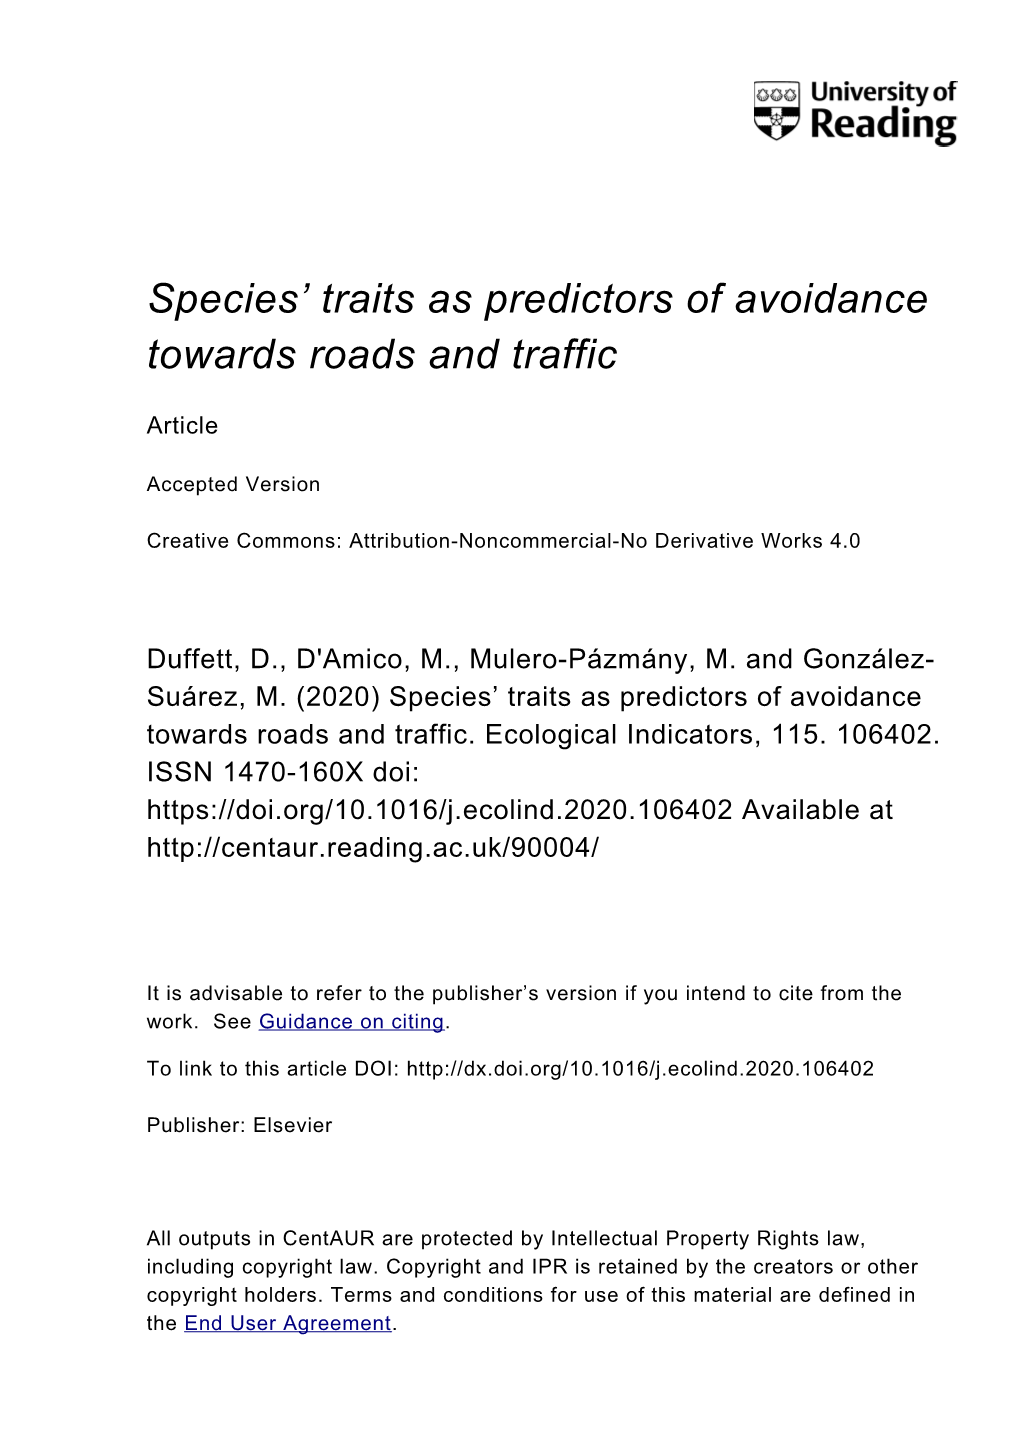 Species' Traits As Predictors of Avoidance Towards Roads and Traffic